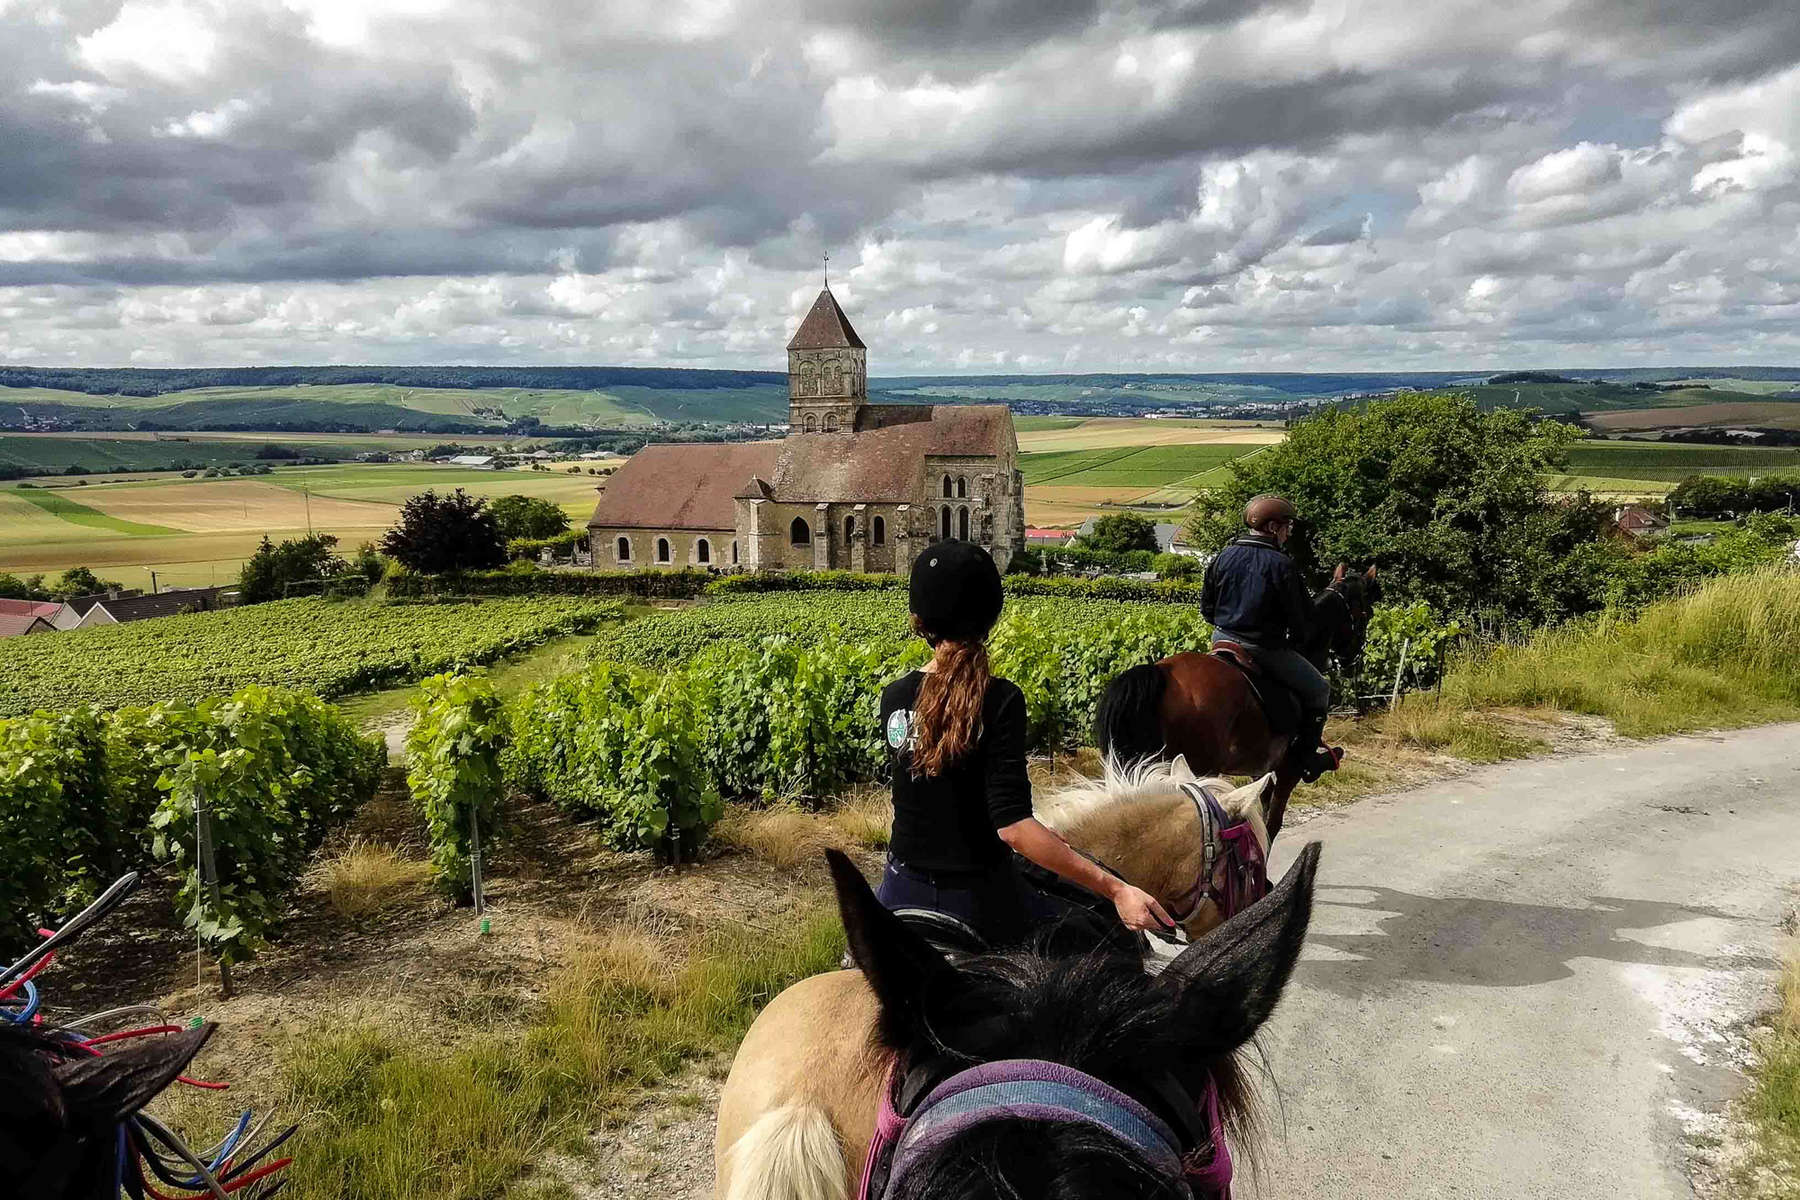 Trail riders in the French region of Alsace